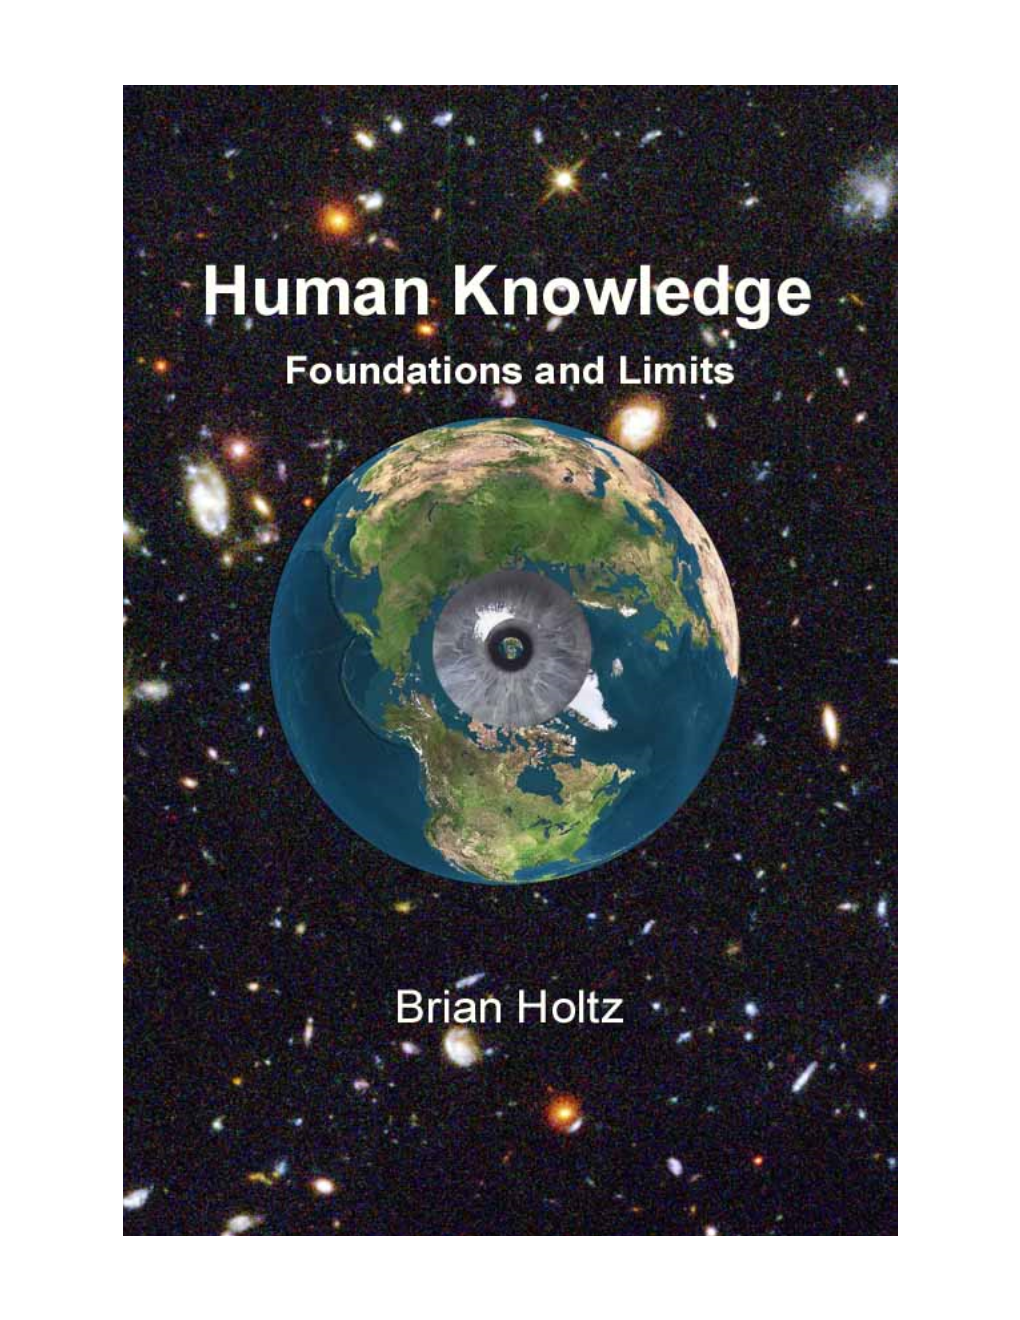 Human Knowledge: Foundations and Limits